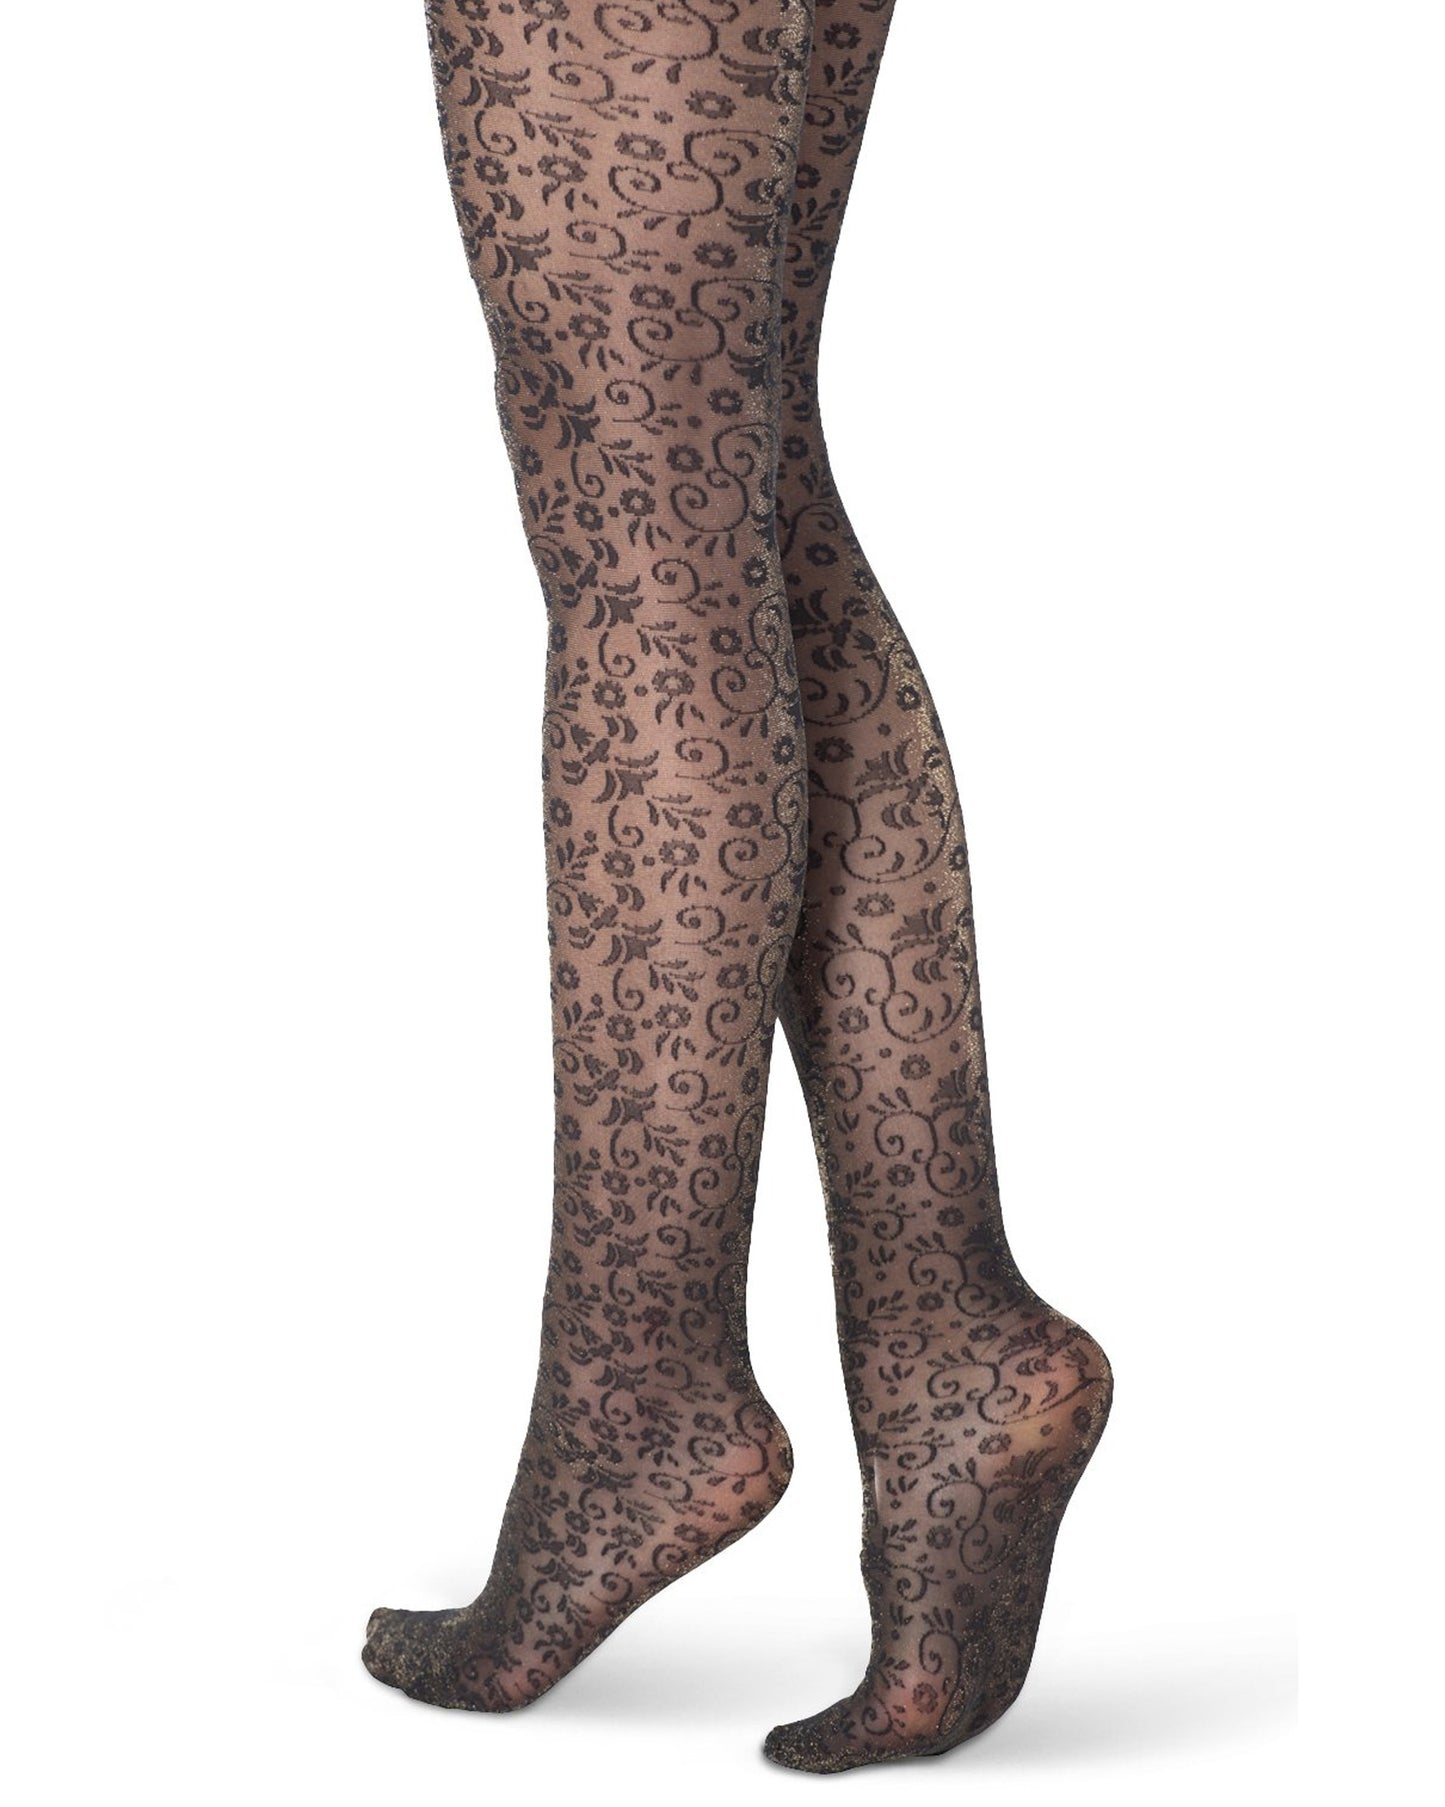 Sheer black fashion tights with an all over floral pattern with sparkly gold lamé, perfect for party season